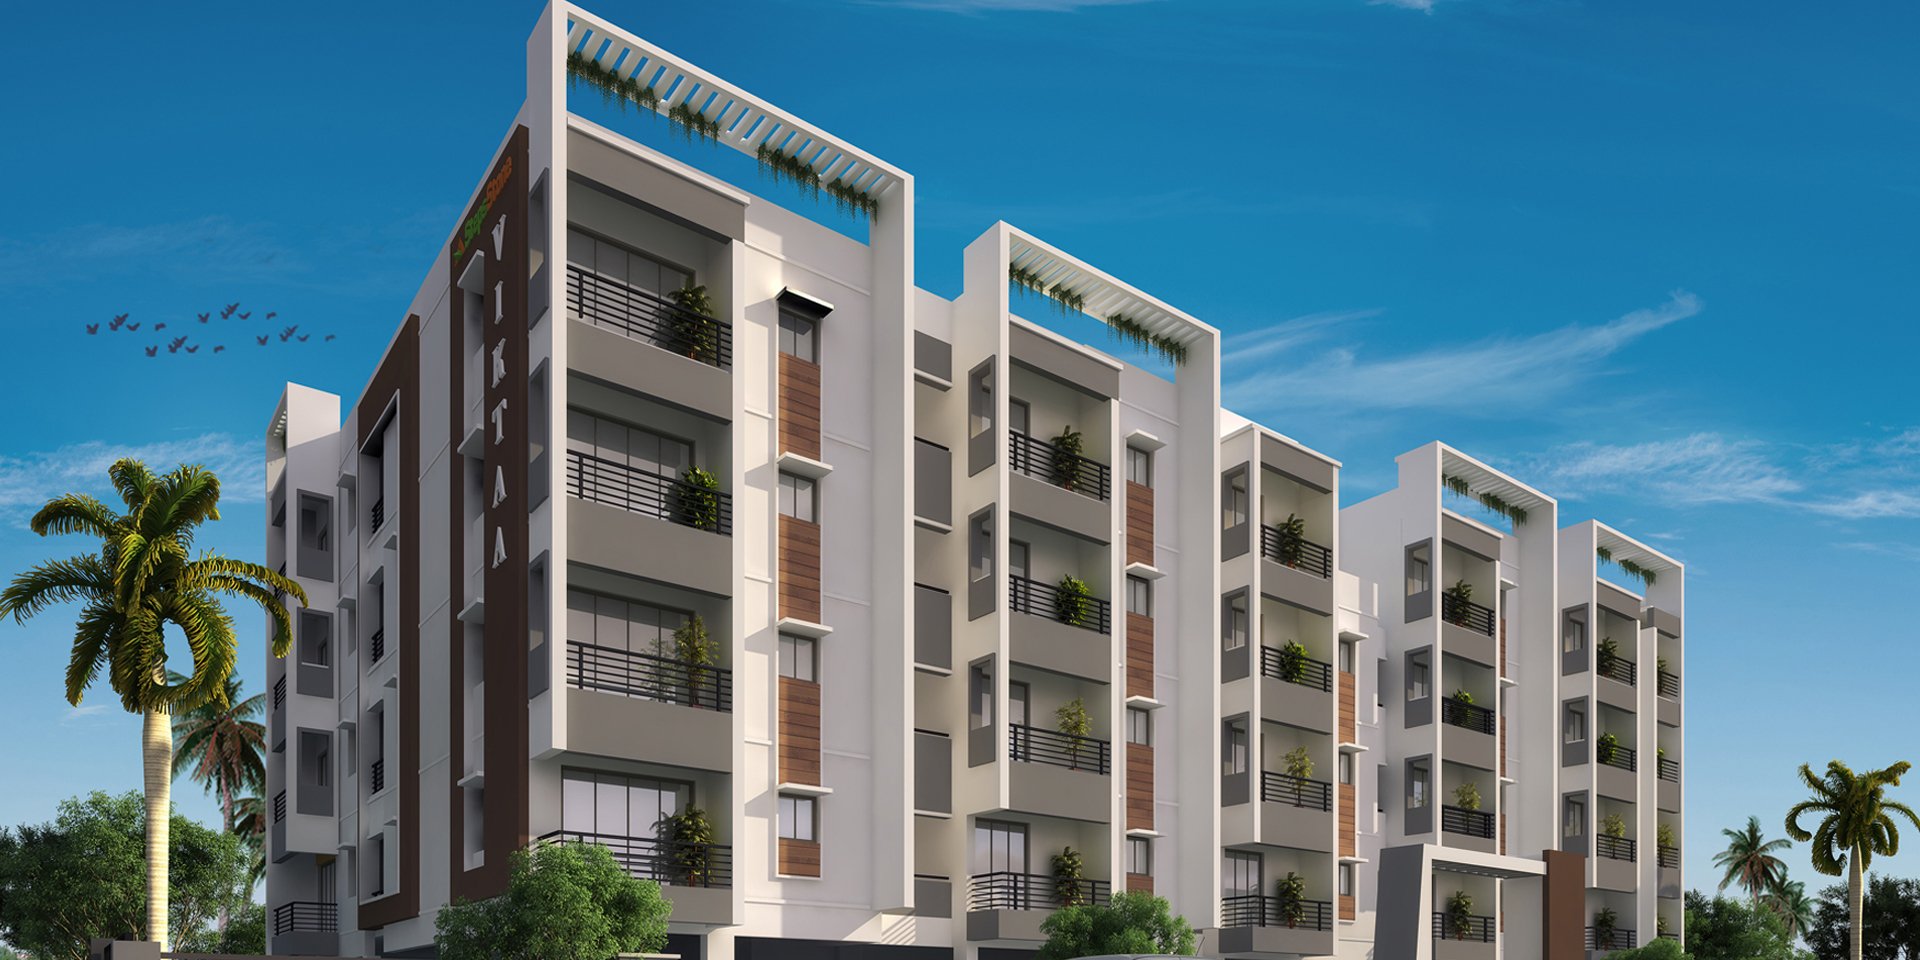 2 BHK Apartment for sale in Maduravoyal